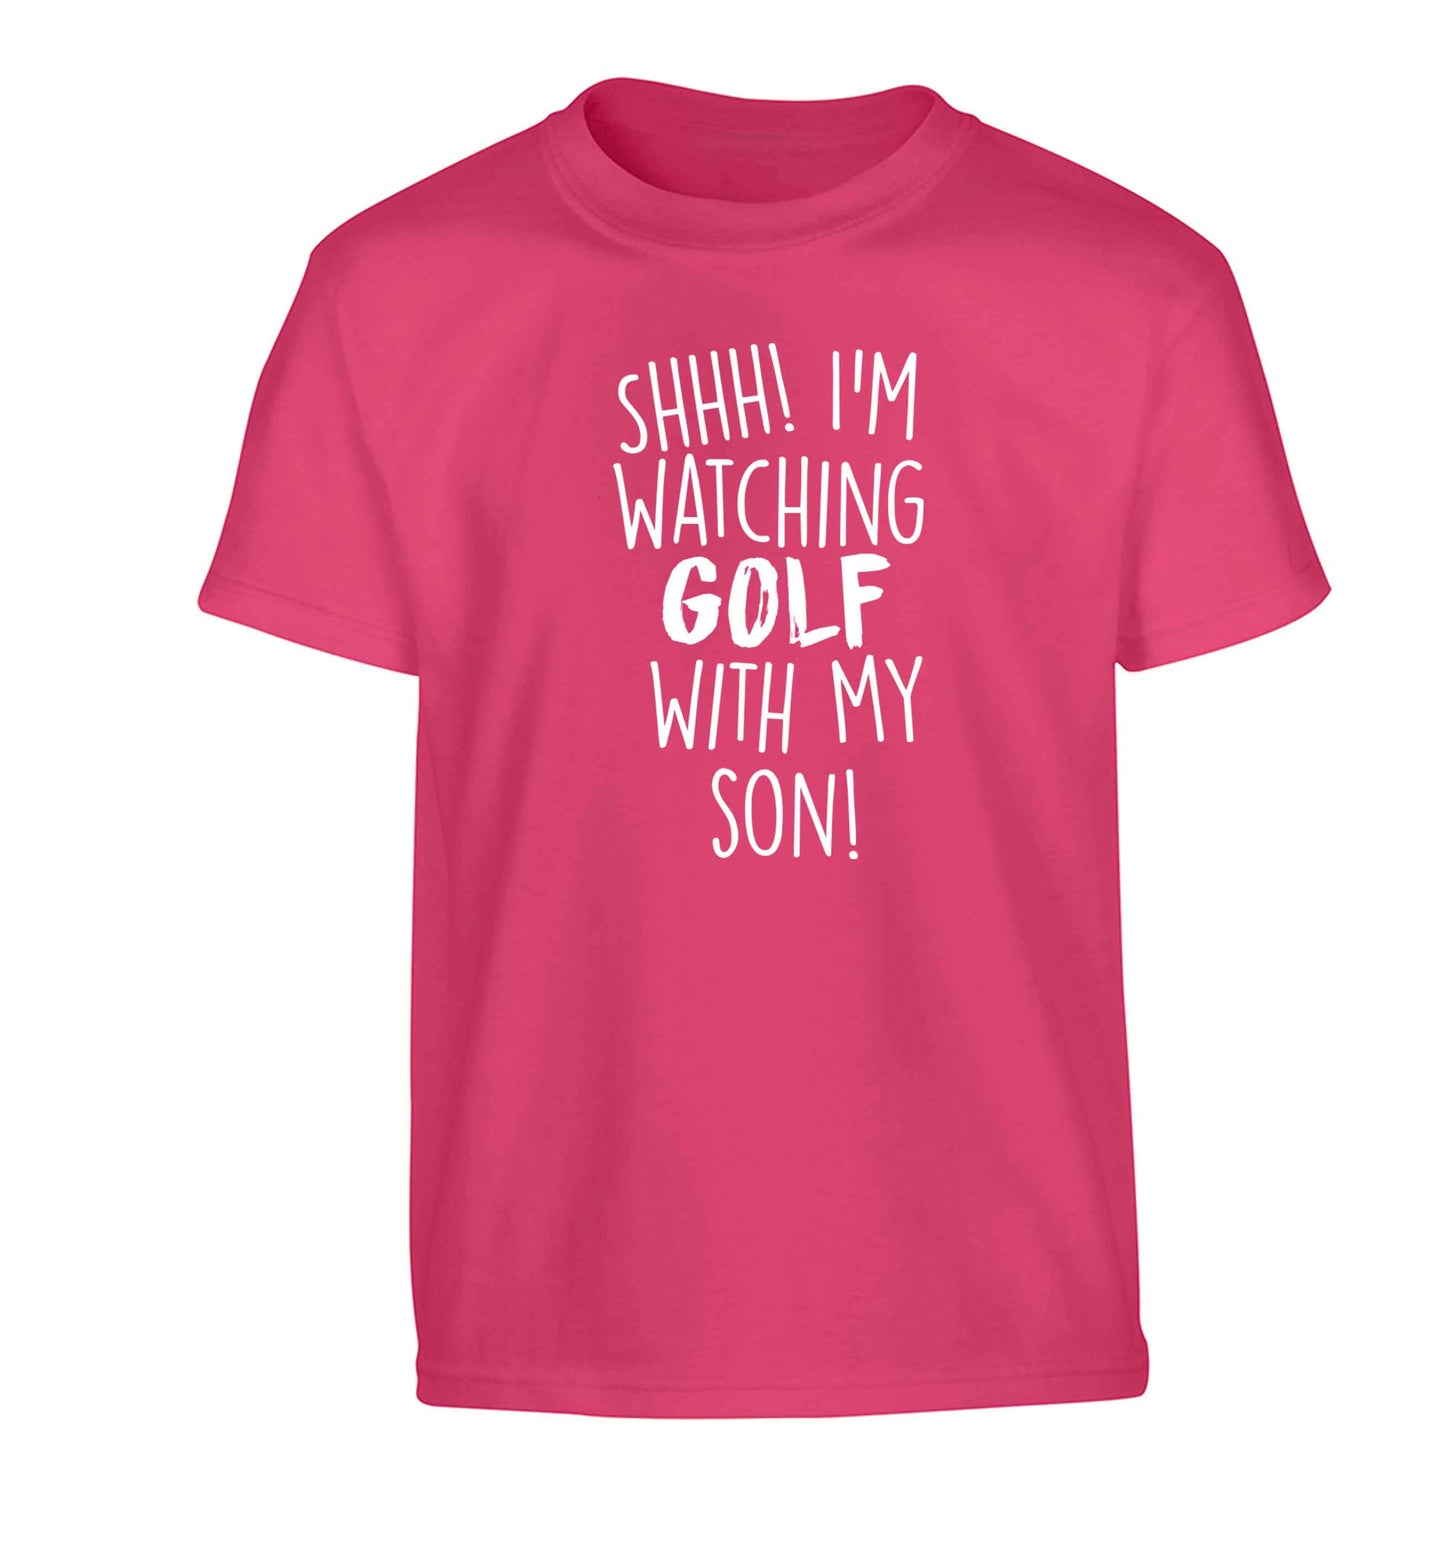 Shh I'm watching golf with my son Children's pink Tshirt 12-13 Years